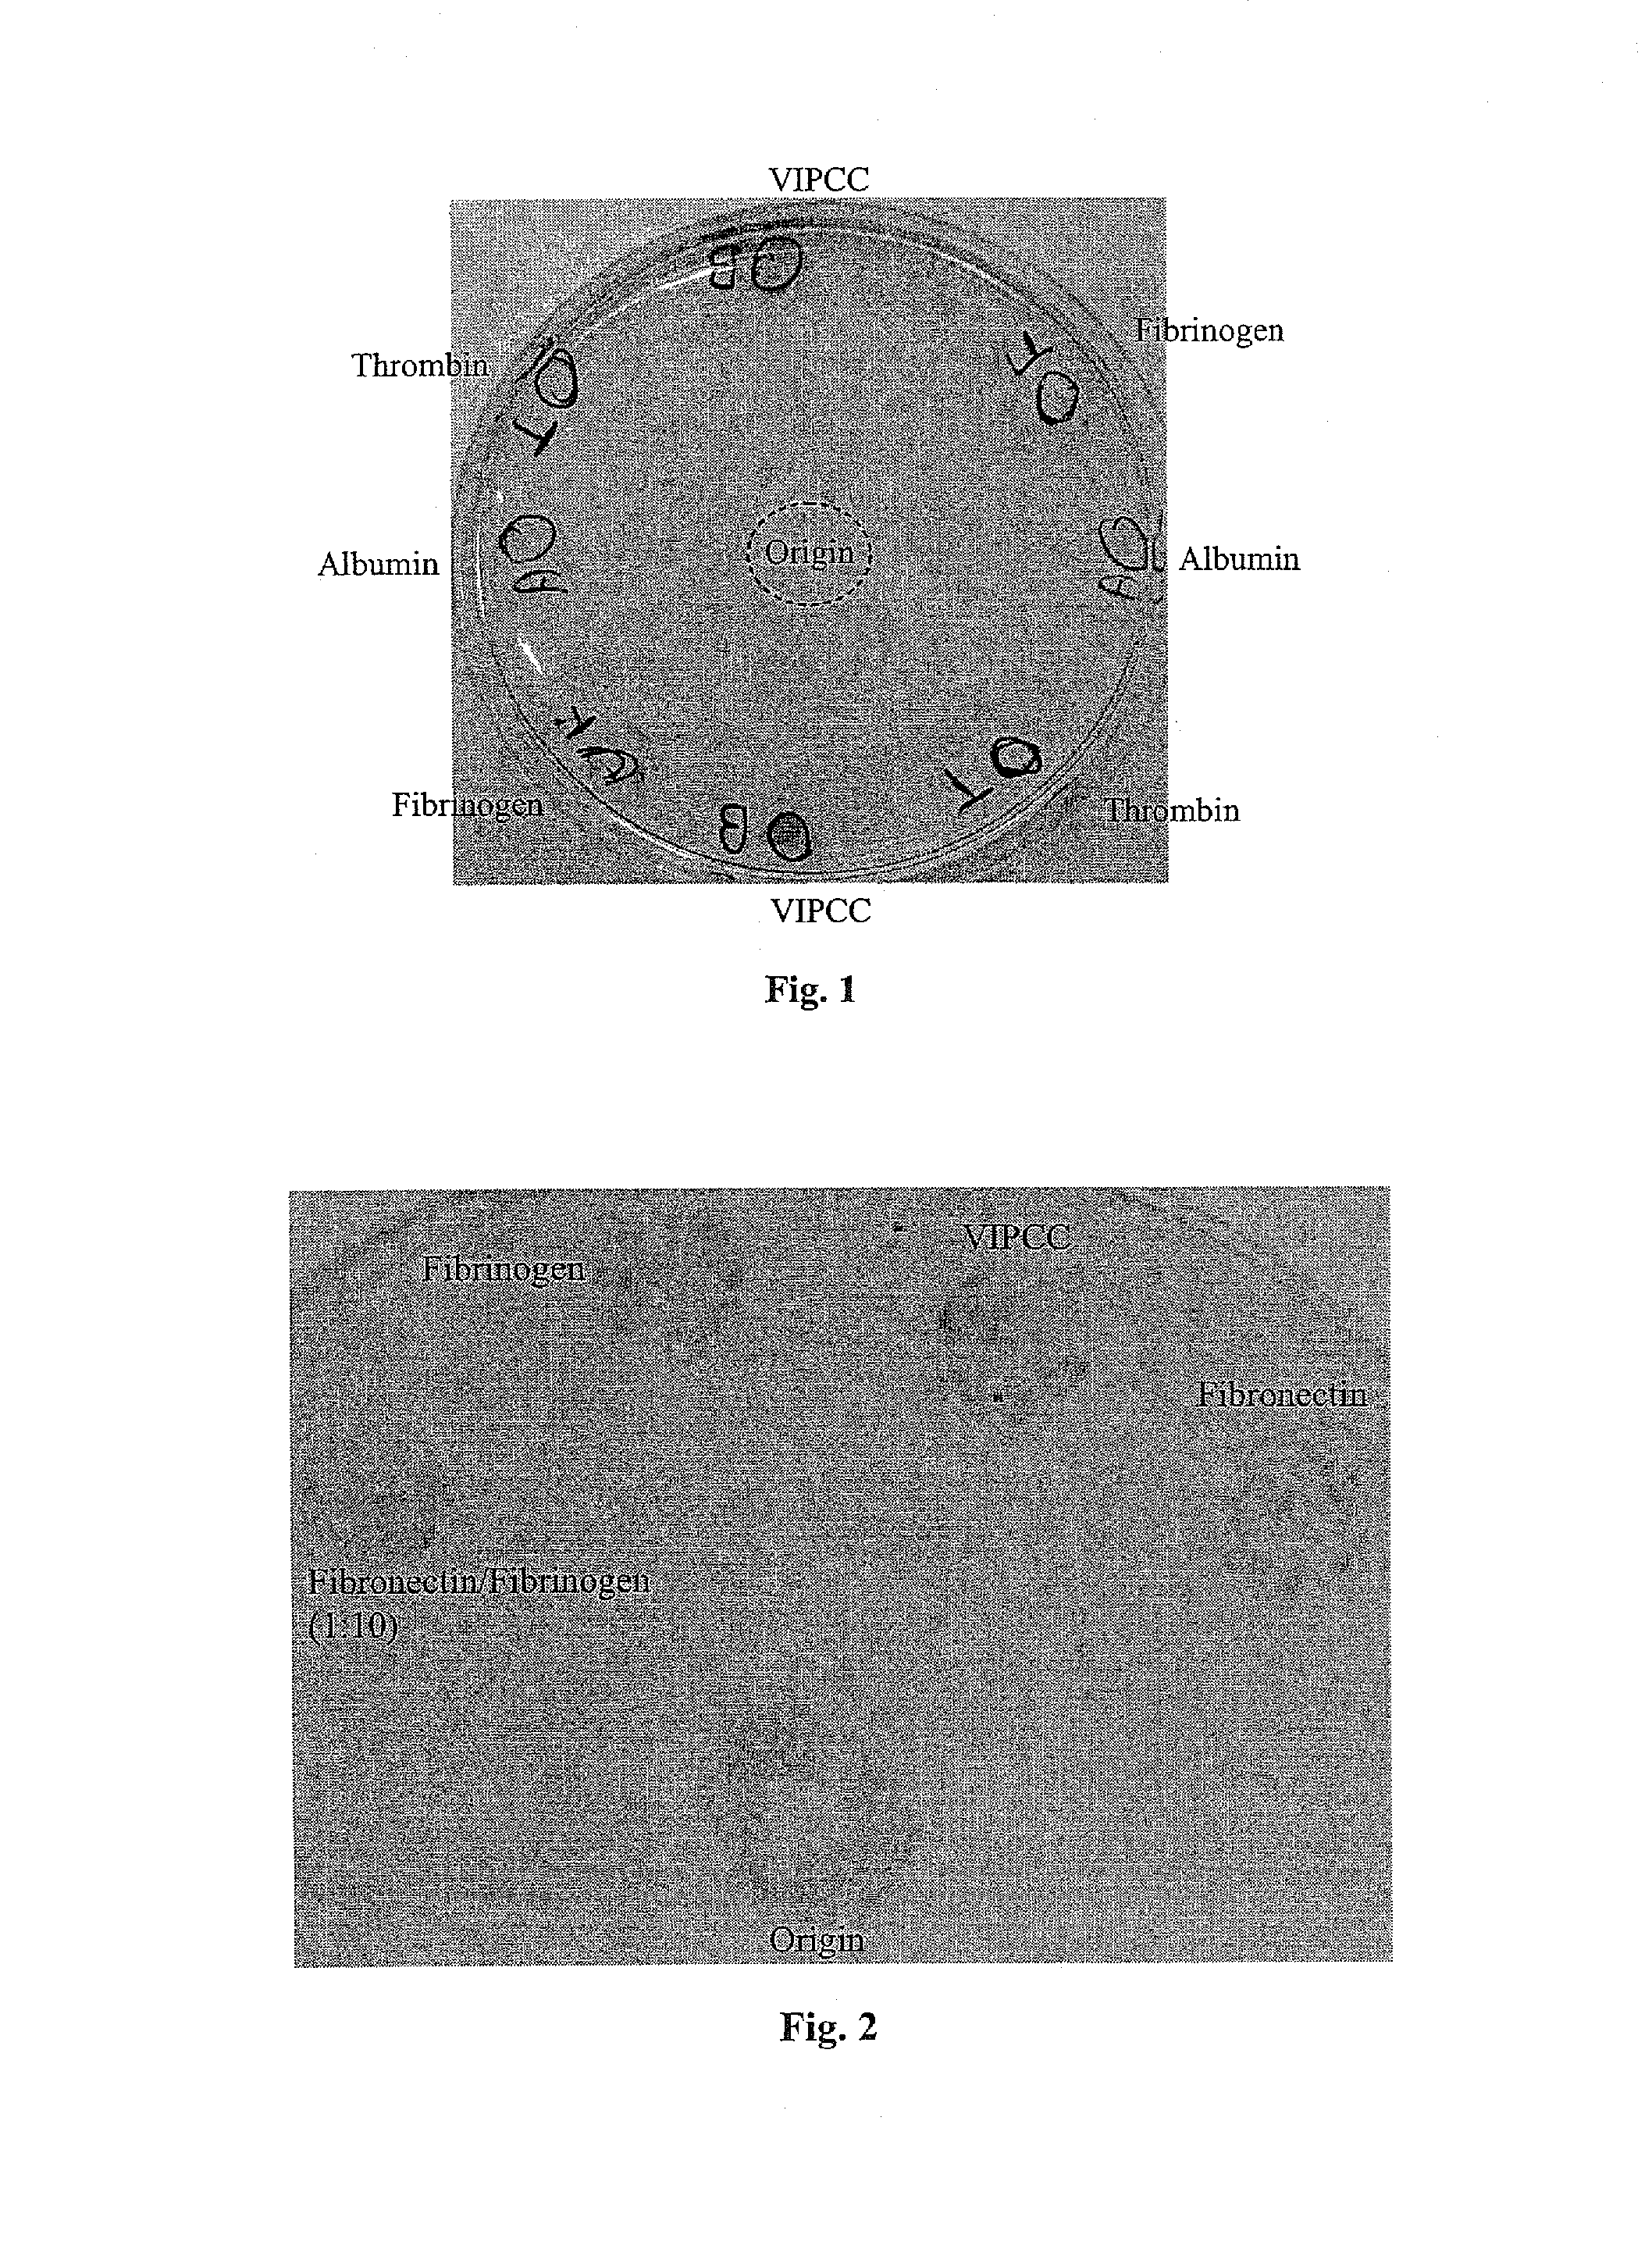 Compositions suitable for treatment of spinal disease, disorder or condition